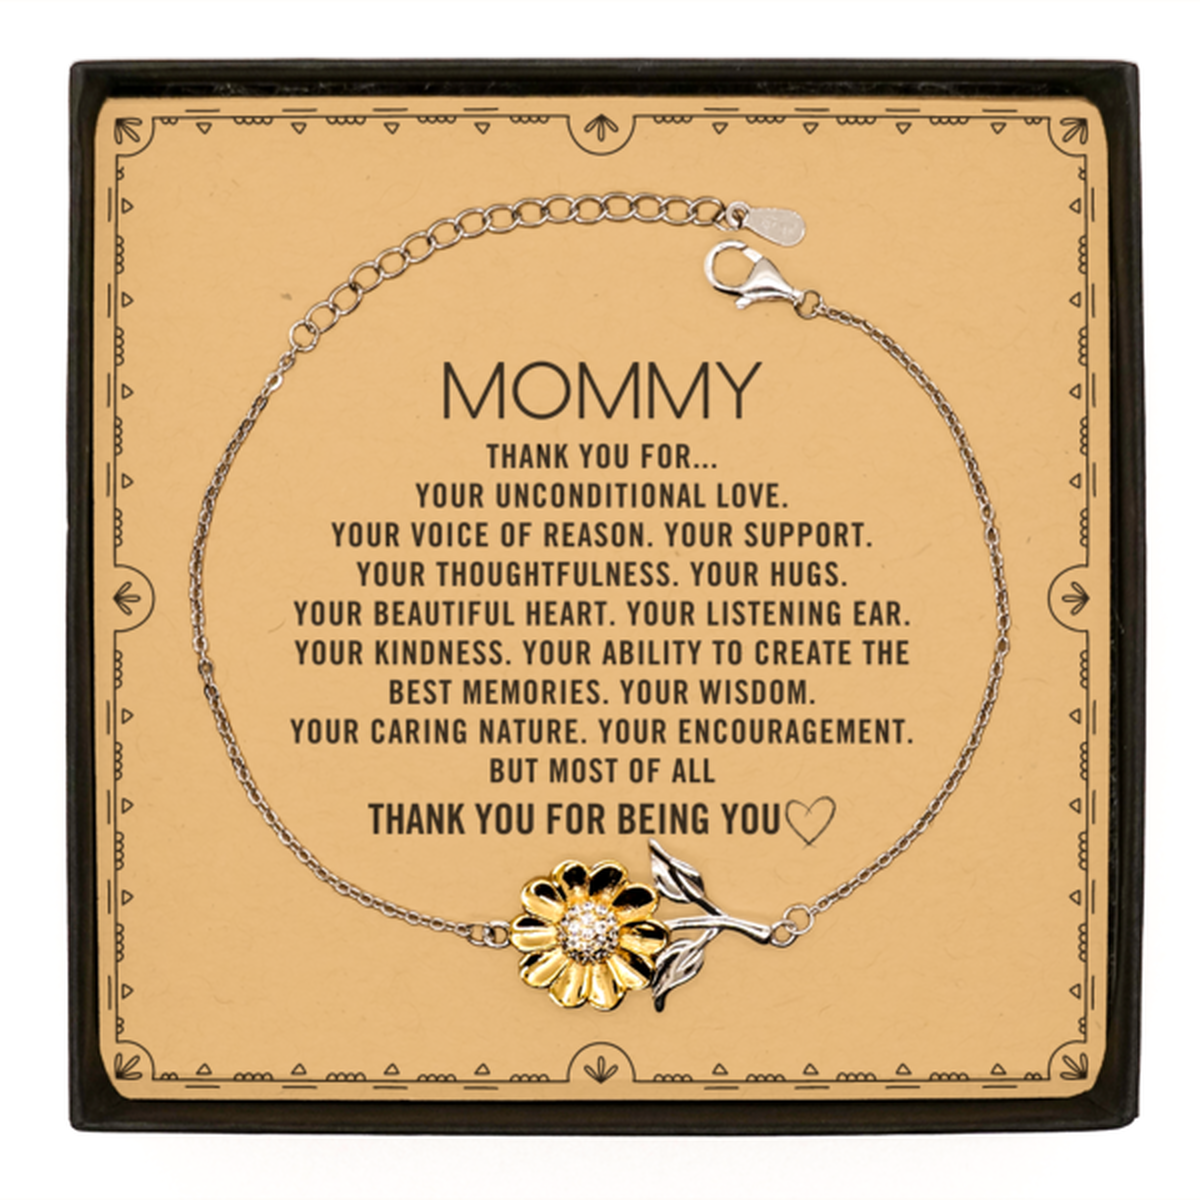 Mommy Sunflower Bracelet Custom, Message Card Gifts For Mommy Christmas Graduation Birthday Gifts for Men Women Mommy Thank you for Your unconditional love